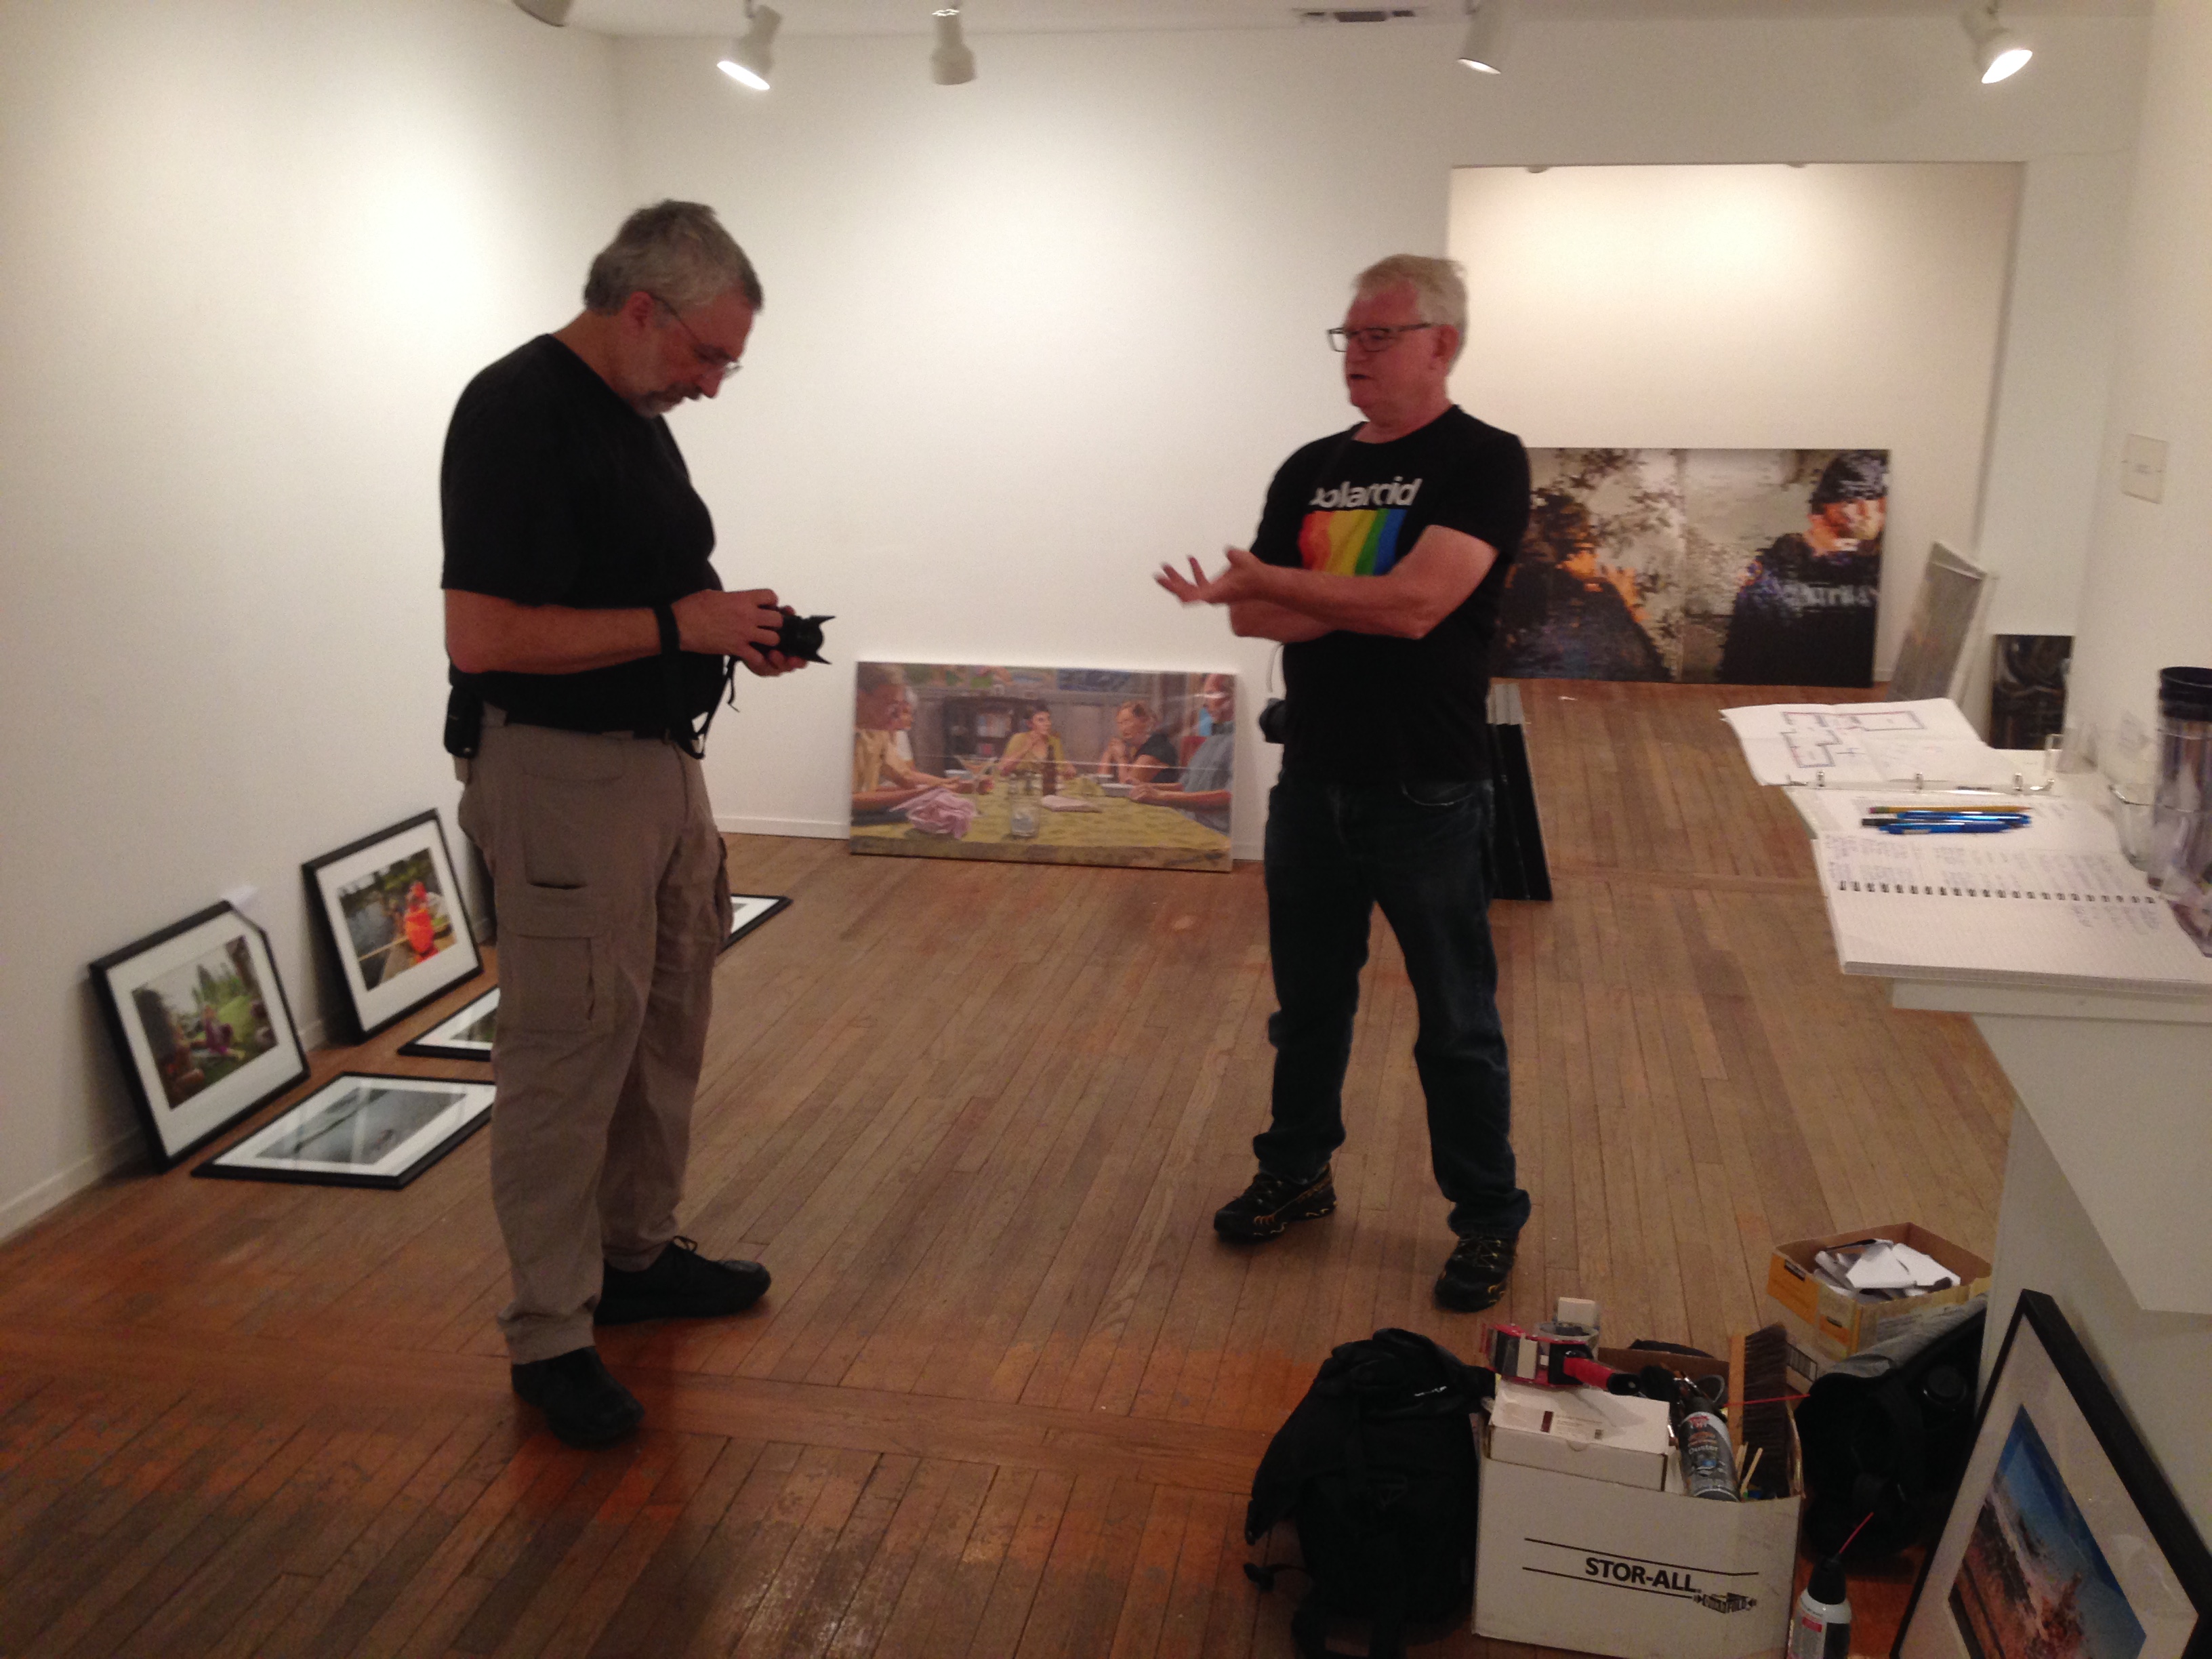 Hanging the show at Gallery 414